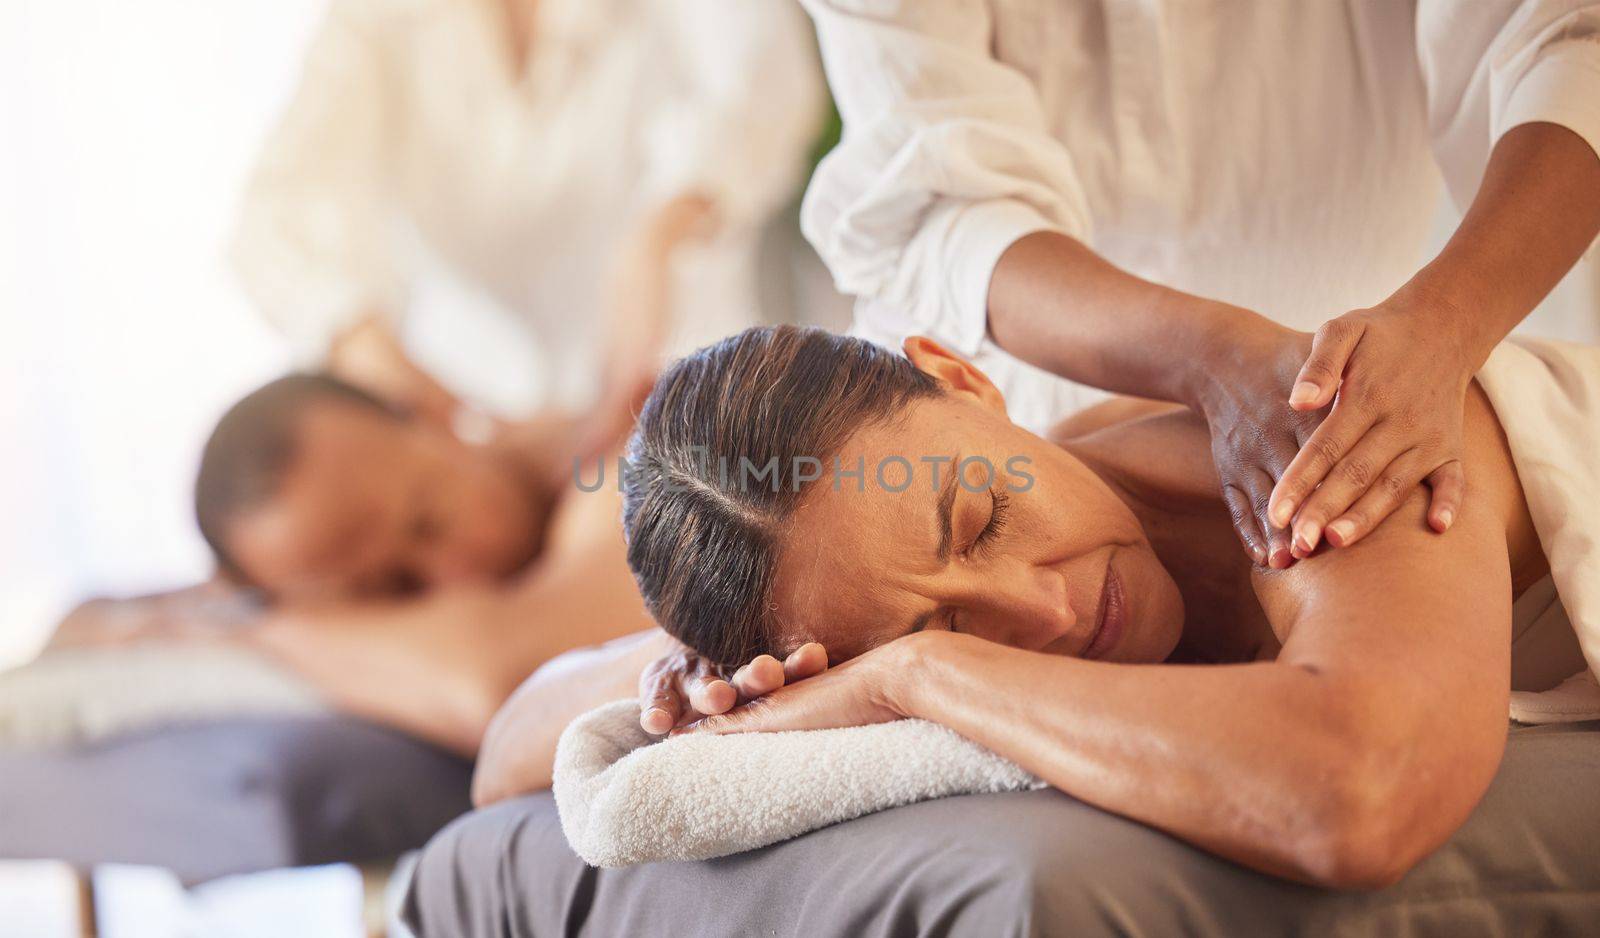 Massage, relax and peace with couple in spa for healing, health and zen treatment. Detox, skincare and beauty with hands of massage therapist on man and woman for calm, physical therapy and luxury.